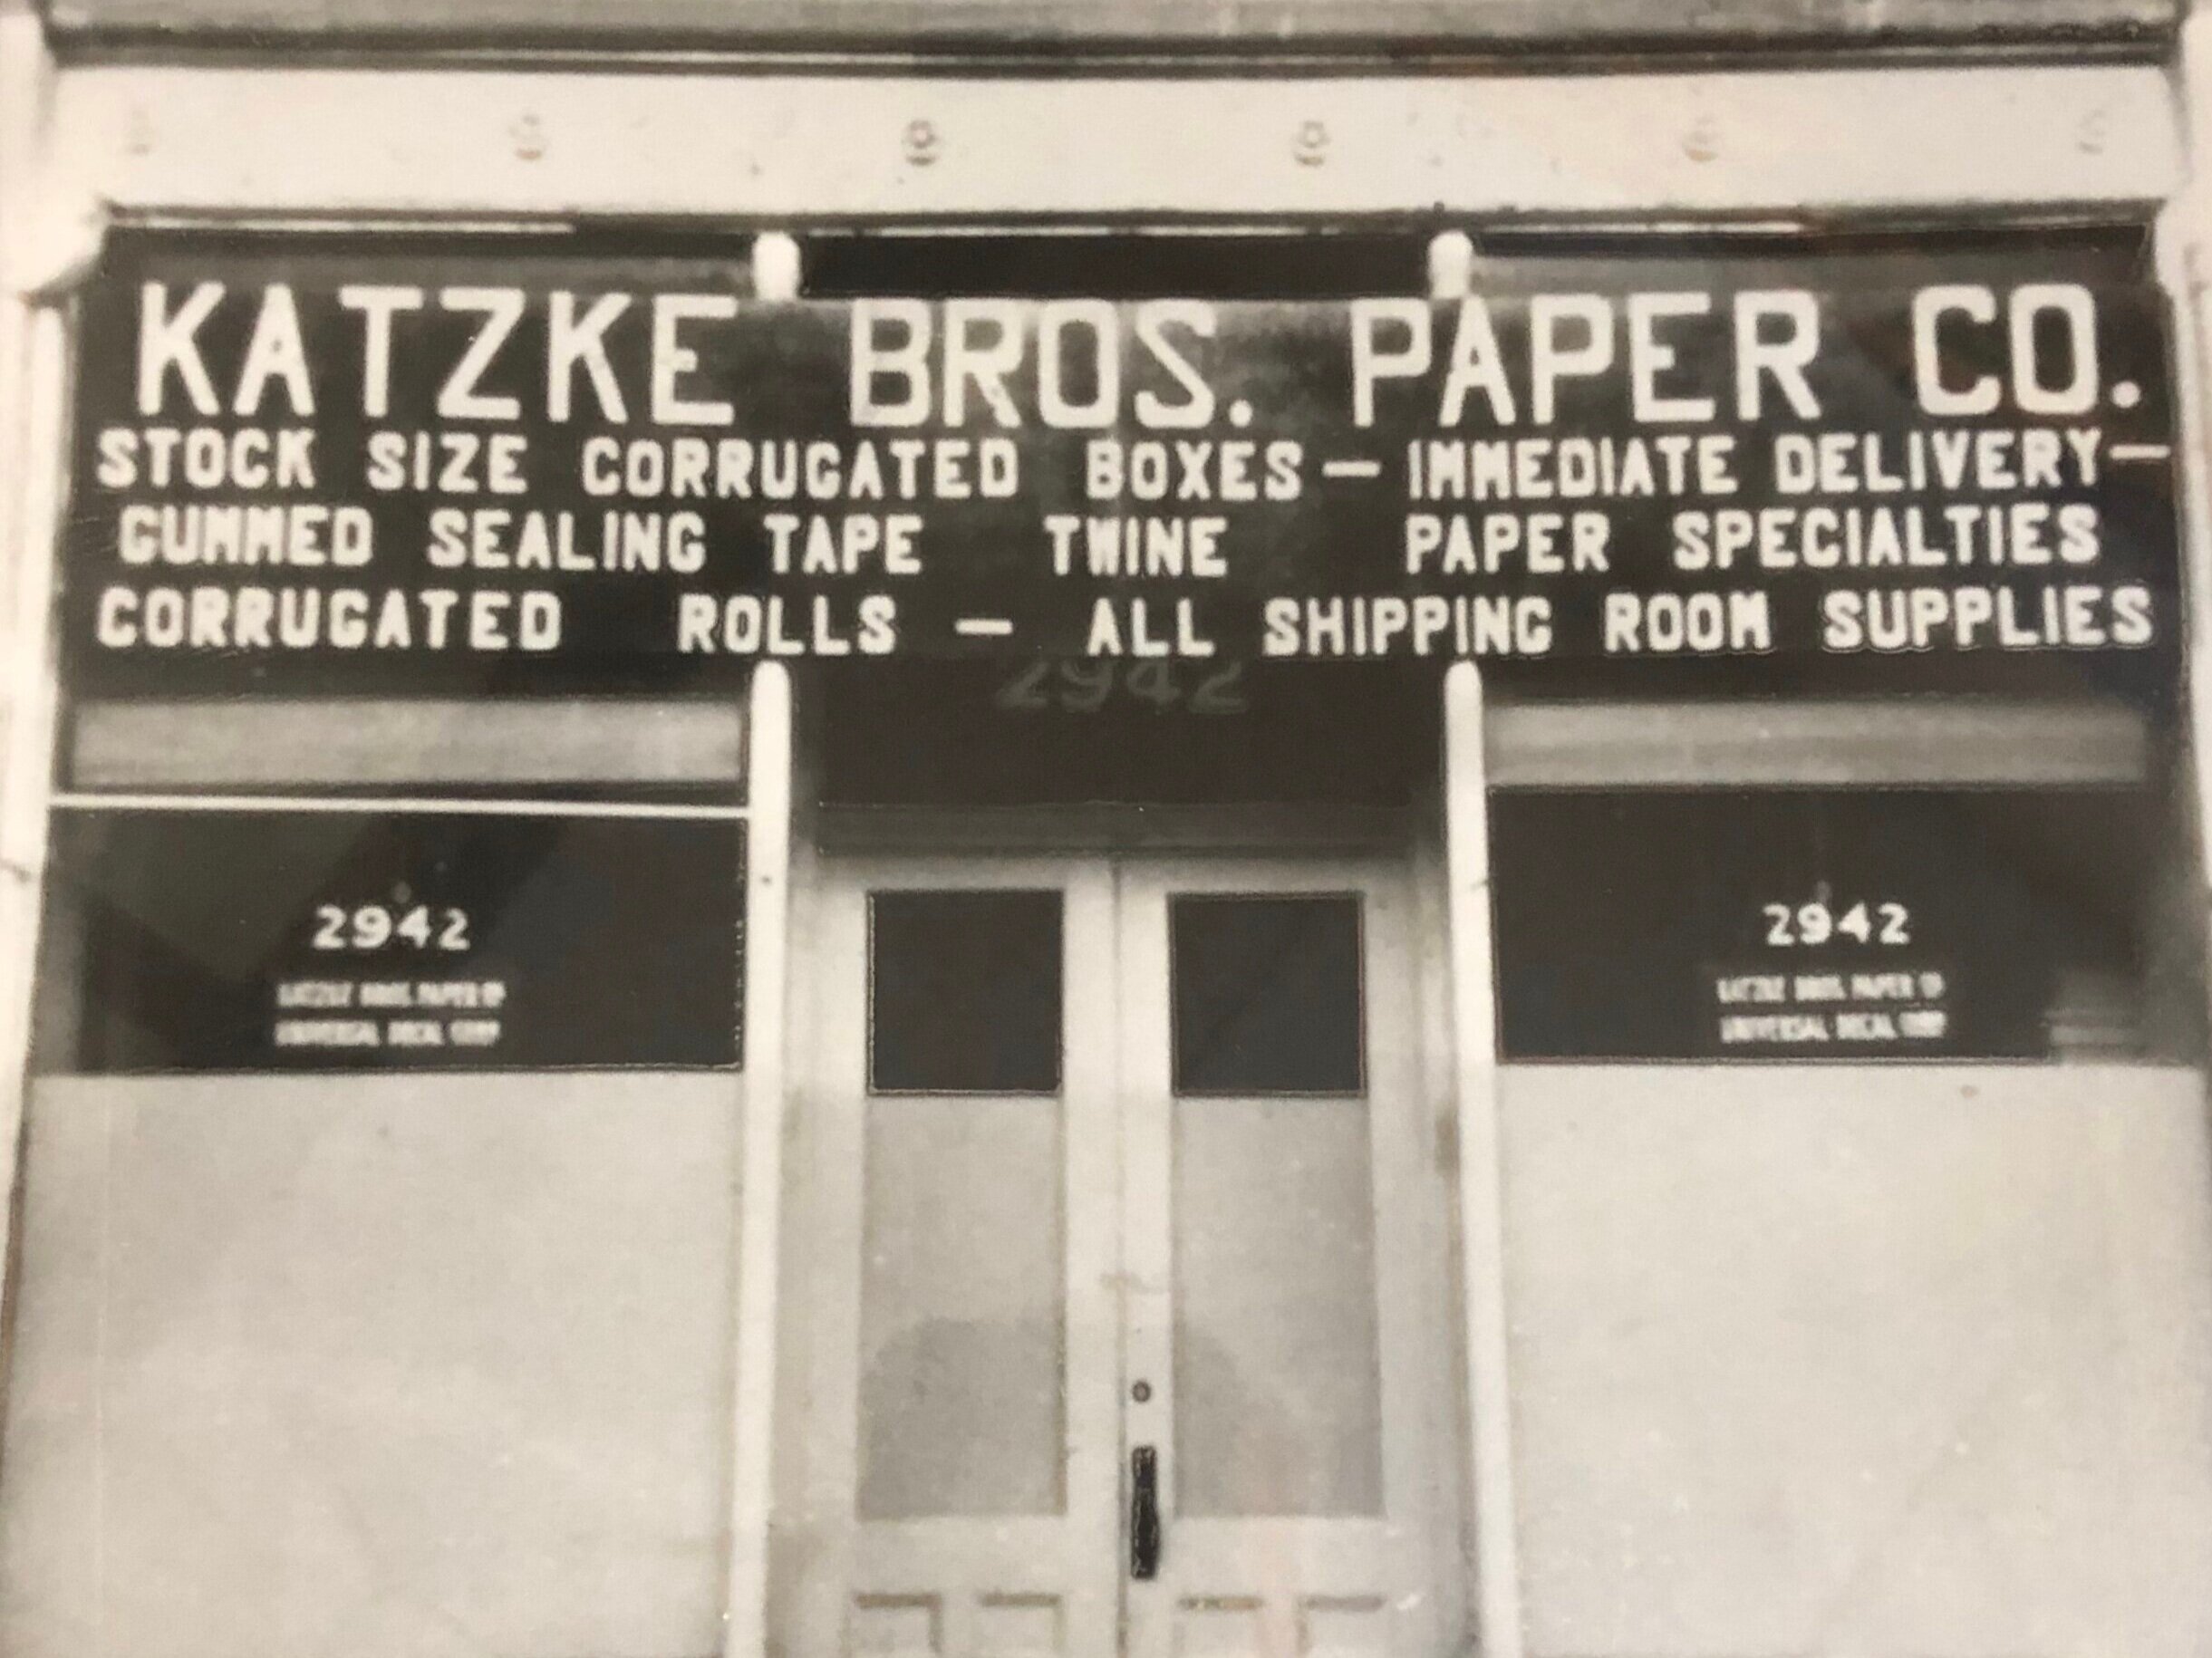 February 1948 - After World War II, Clarence and Bob Katzke came from Illinois to Denver and opened the 14th Avenue Auto Hospital, an auto repair shop. With business not exactly booming, they made ends meet by selling shipping supplies from their garage. Over time, it became apparent that the brothers were much better at selling boxes than fixing cars. It was in February of 1948, Katzke Bros. Paper Co. officially opened for business. As 